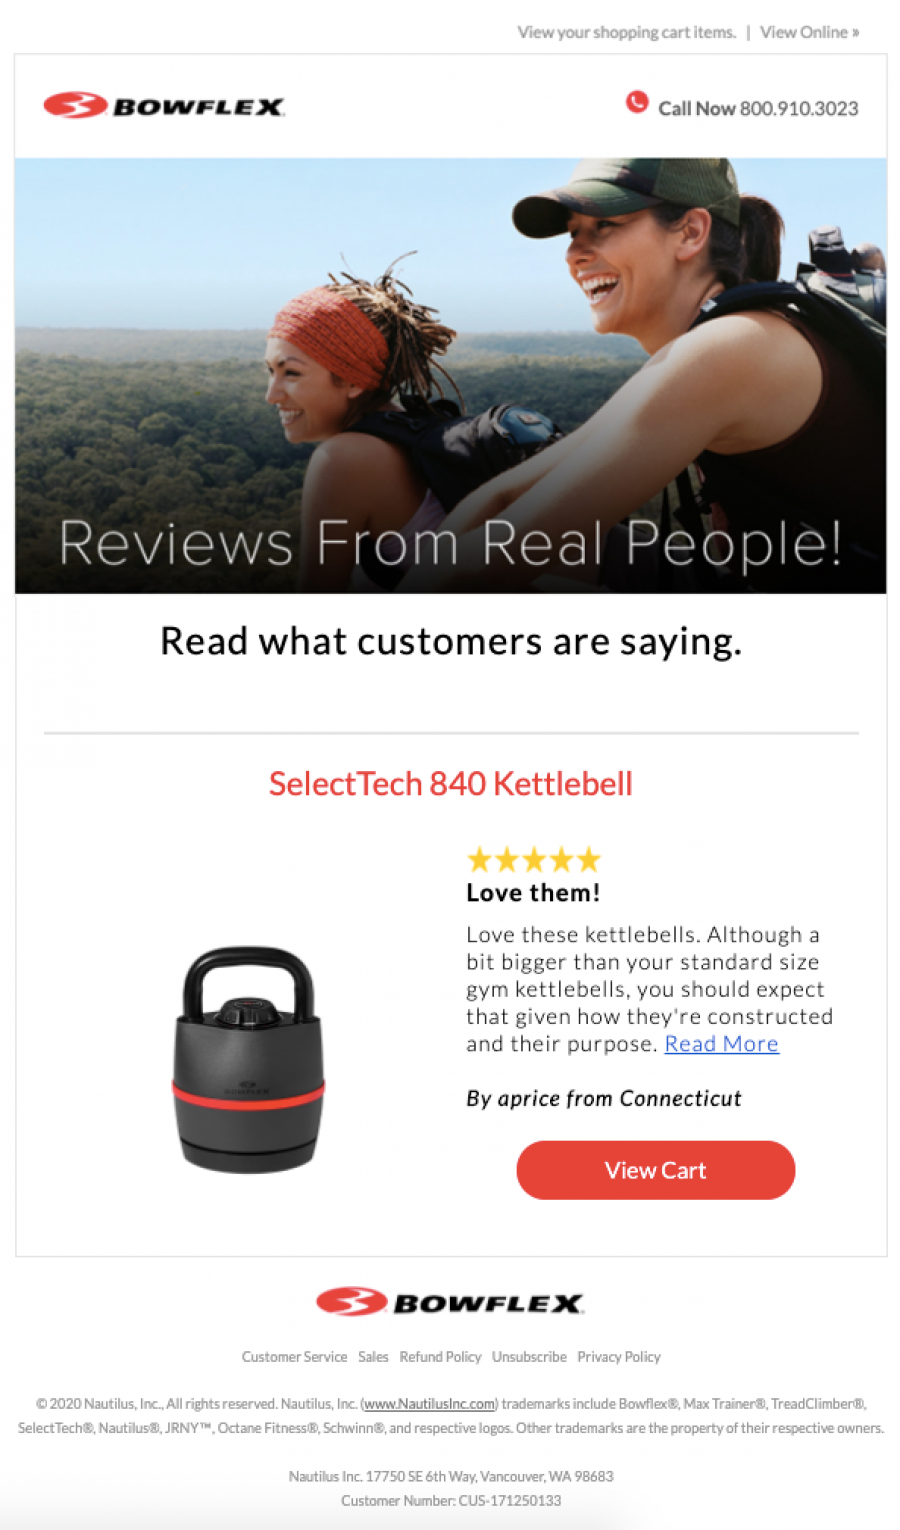 bowflex-review-email